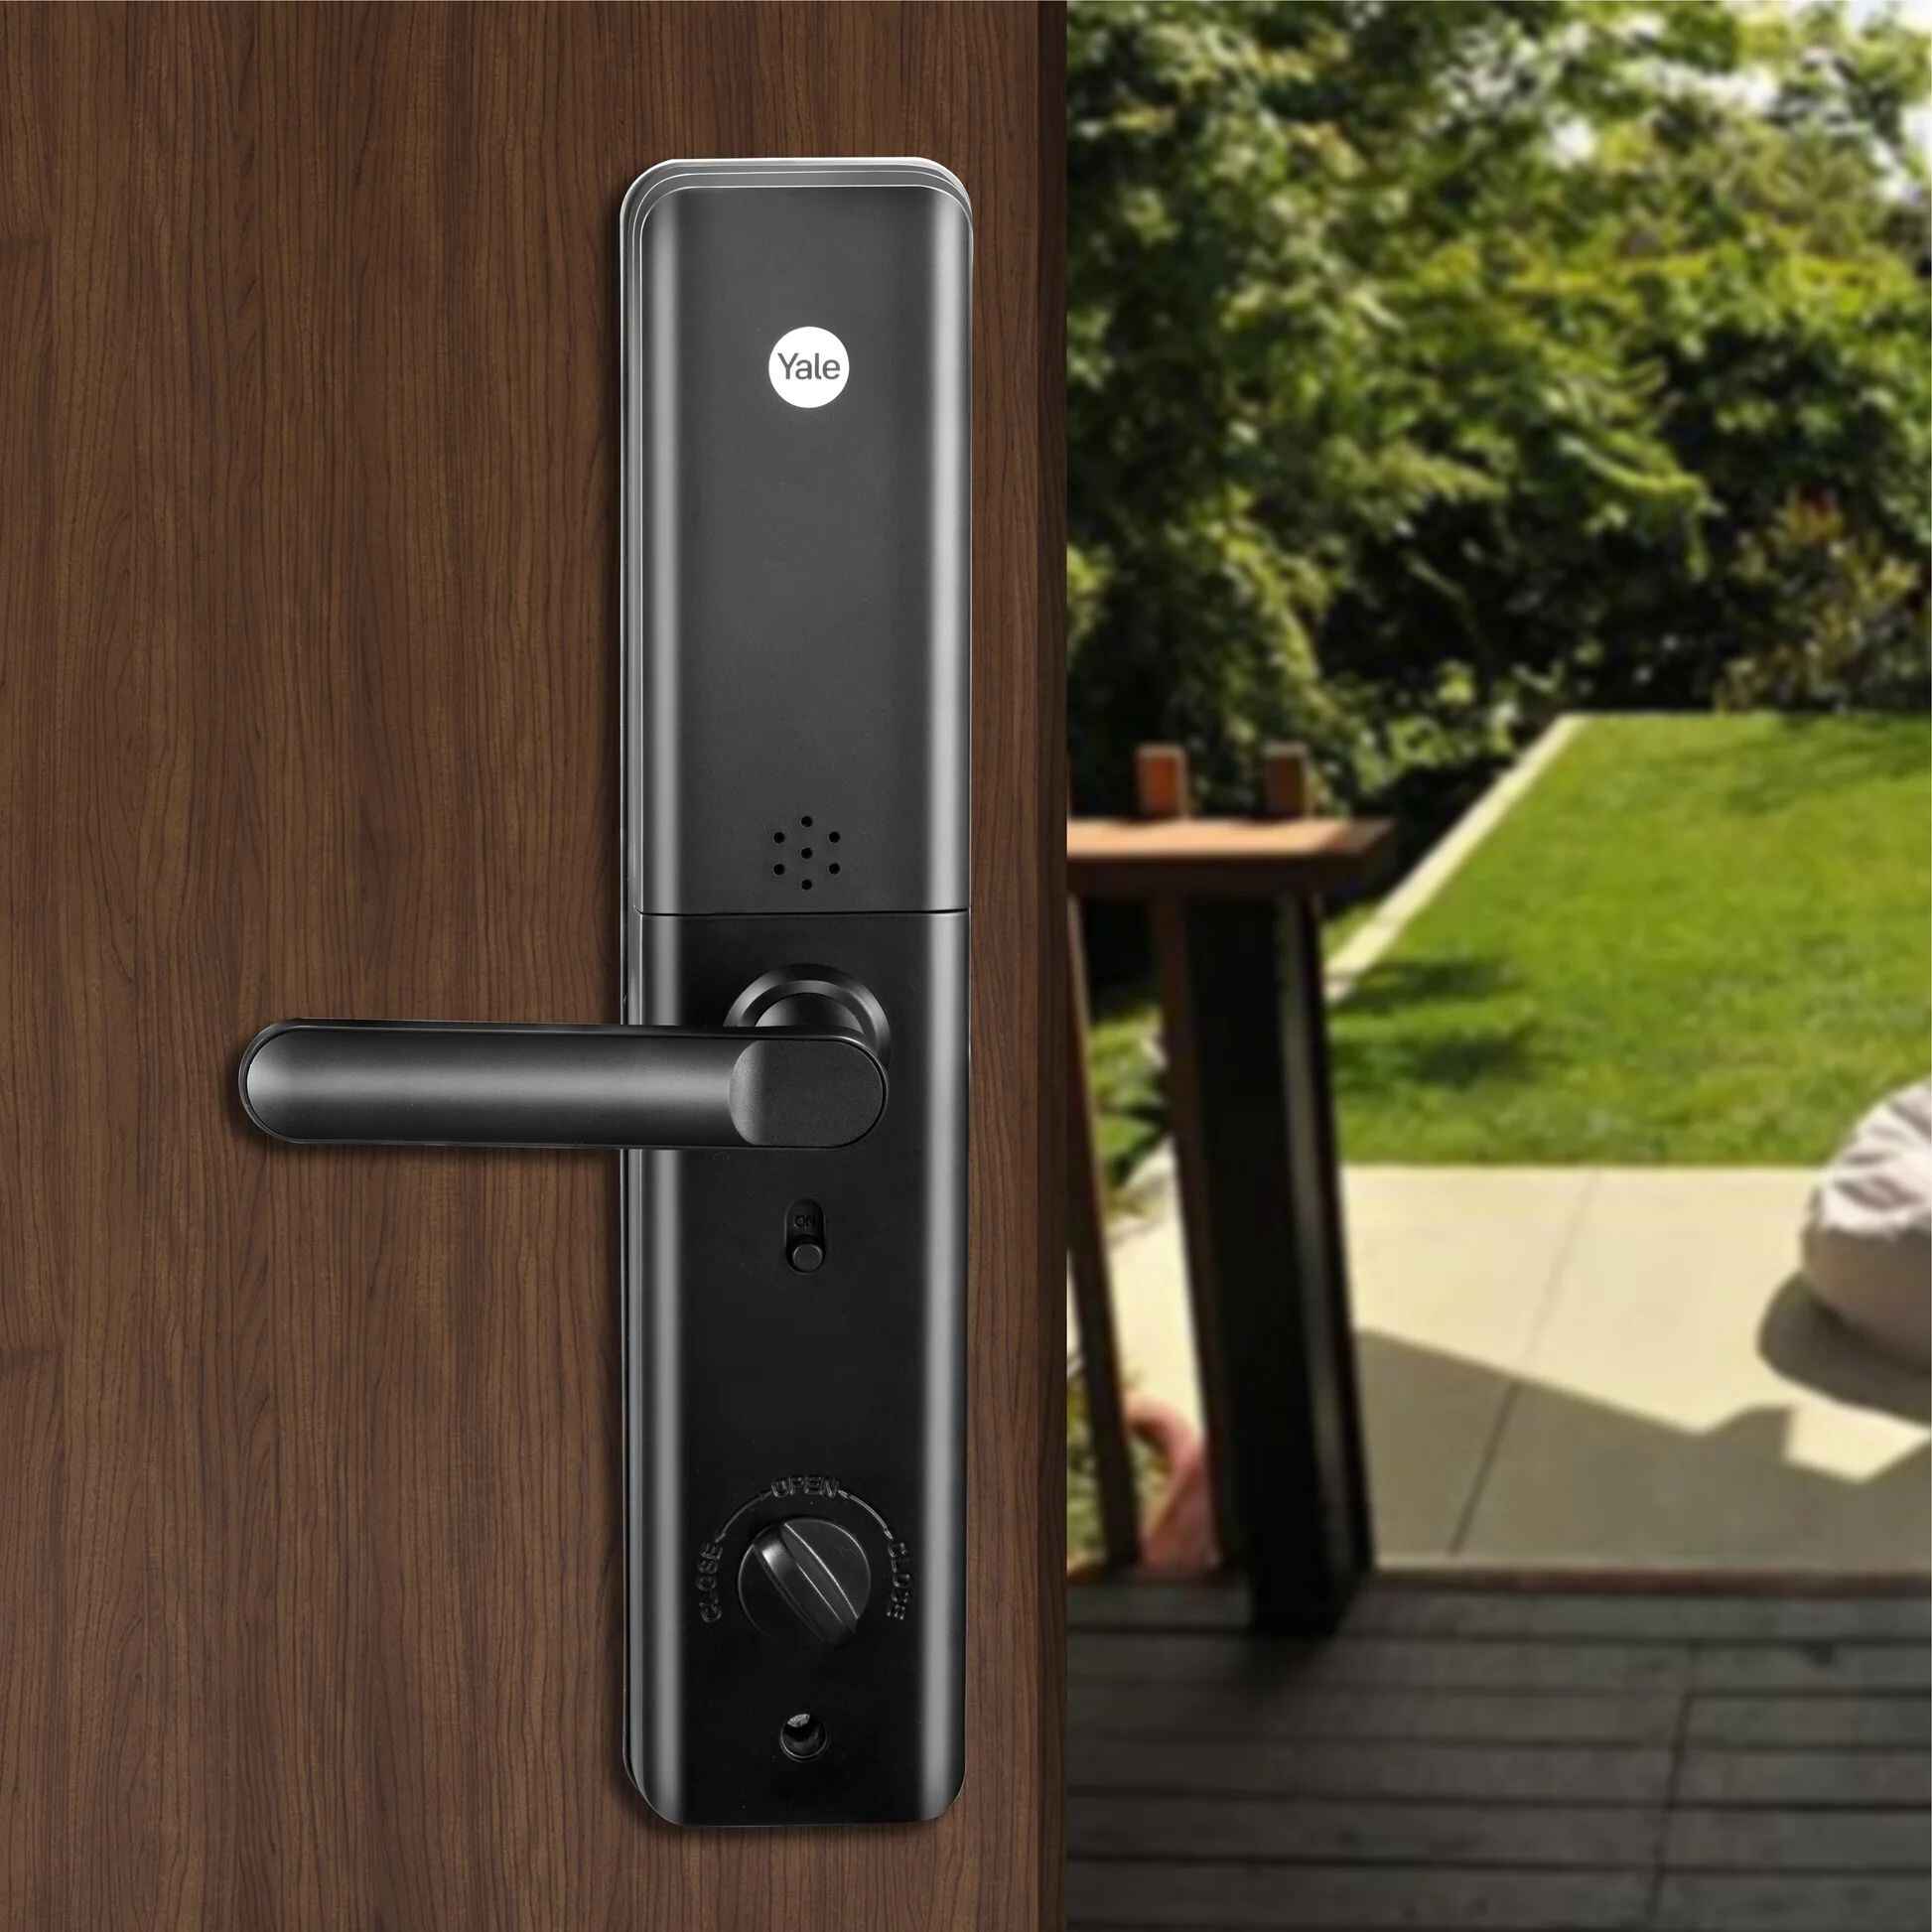 Coolest Tech » Create a Bump Key to Open Any Door